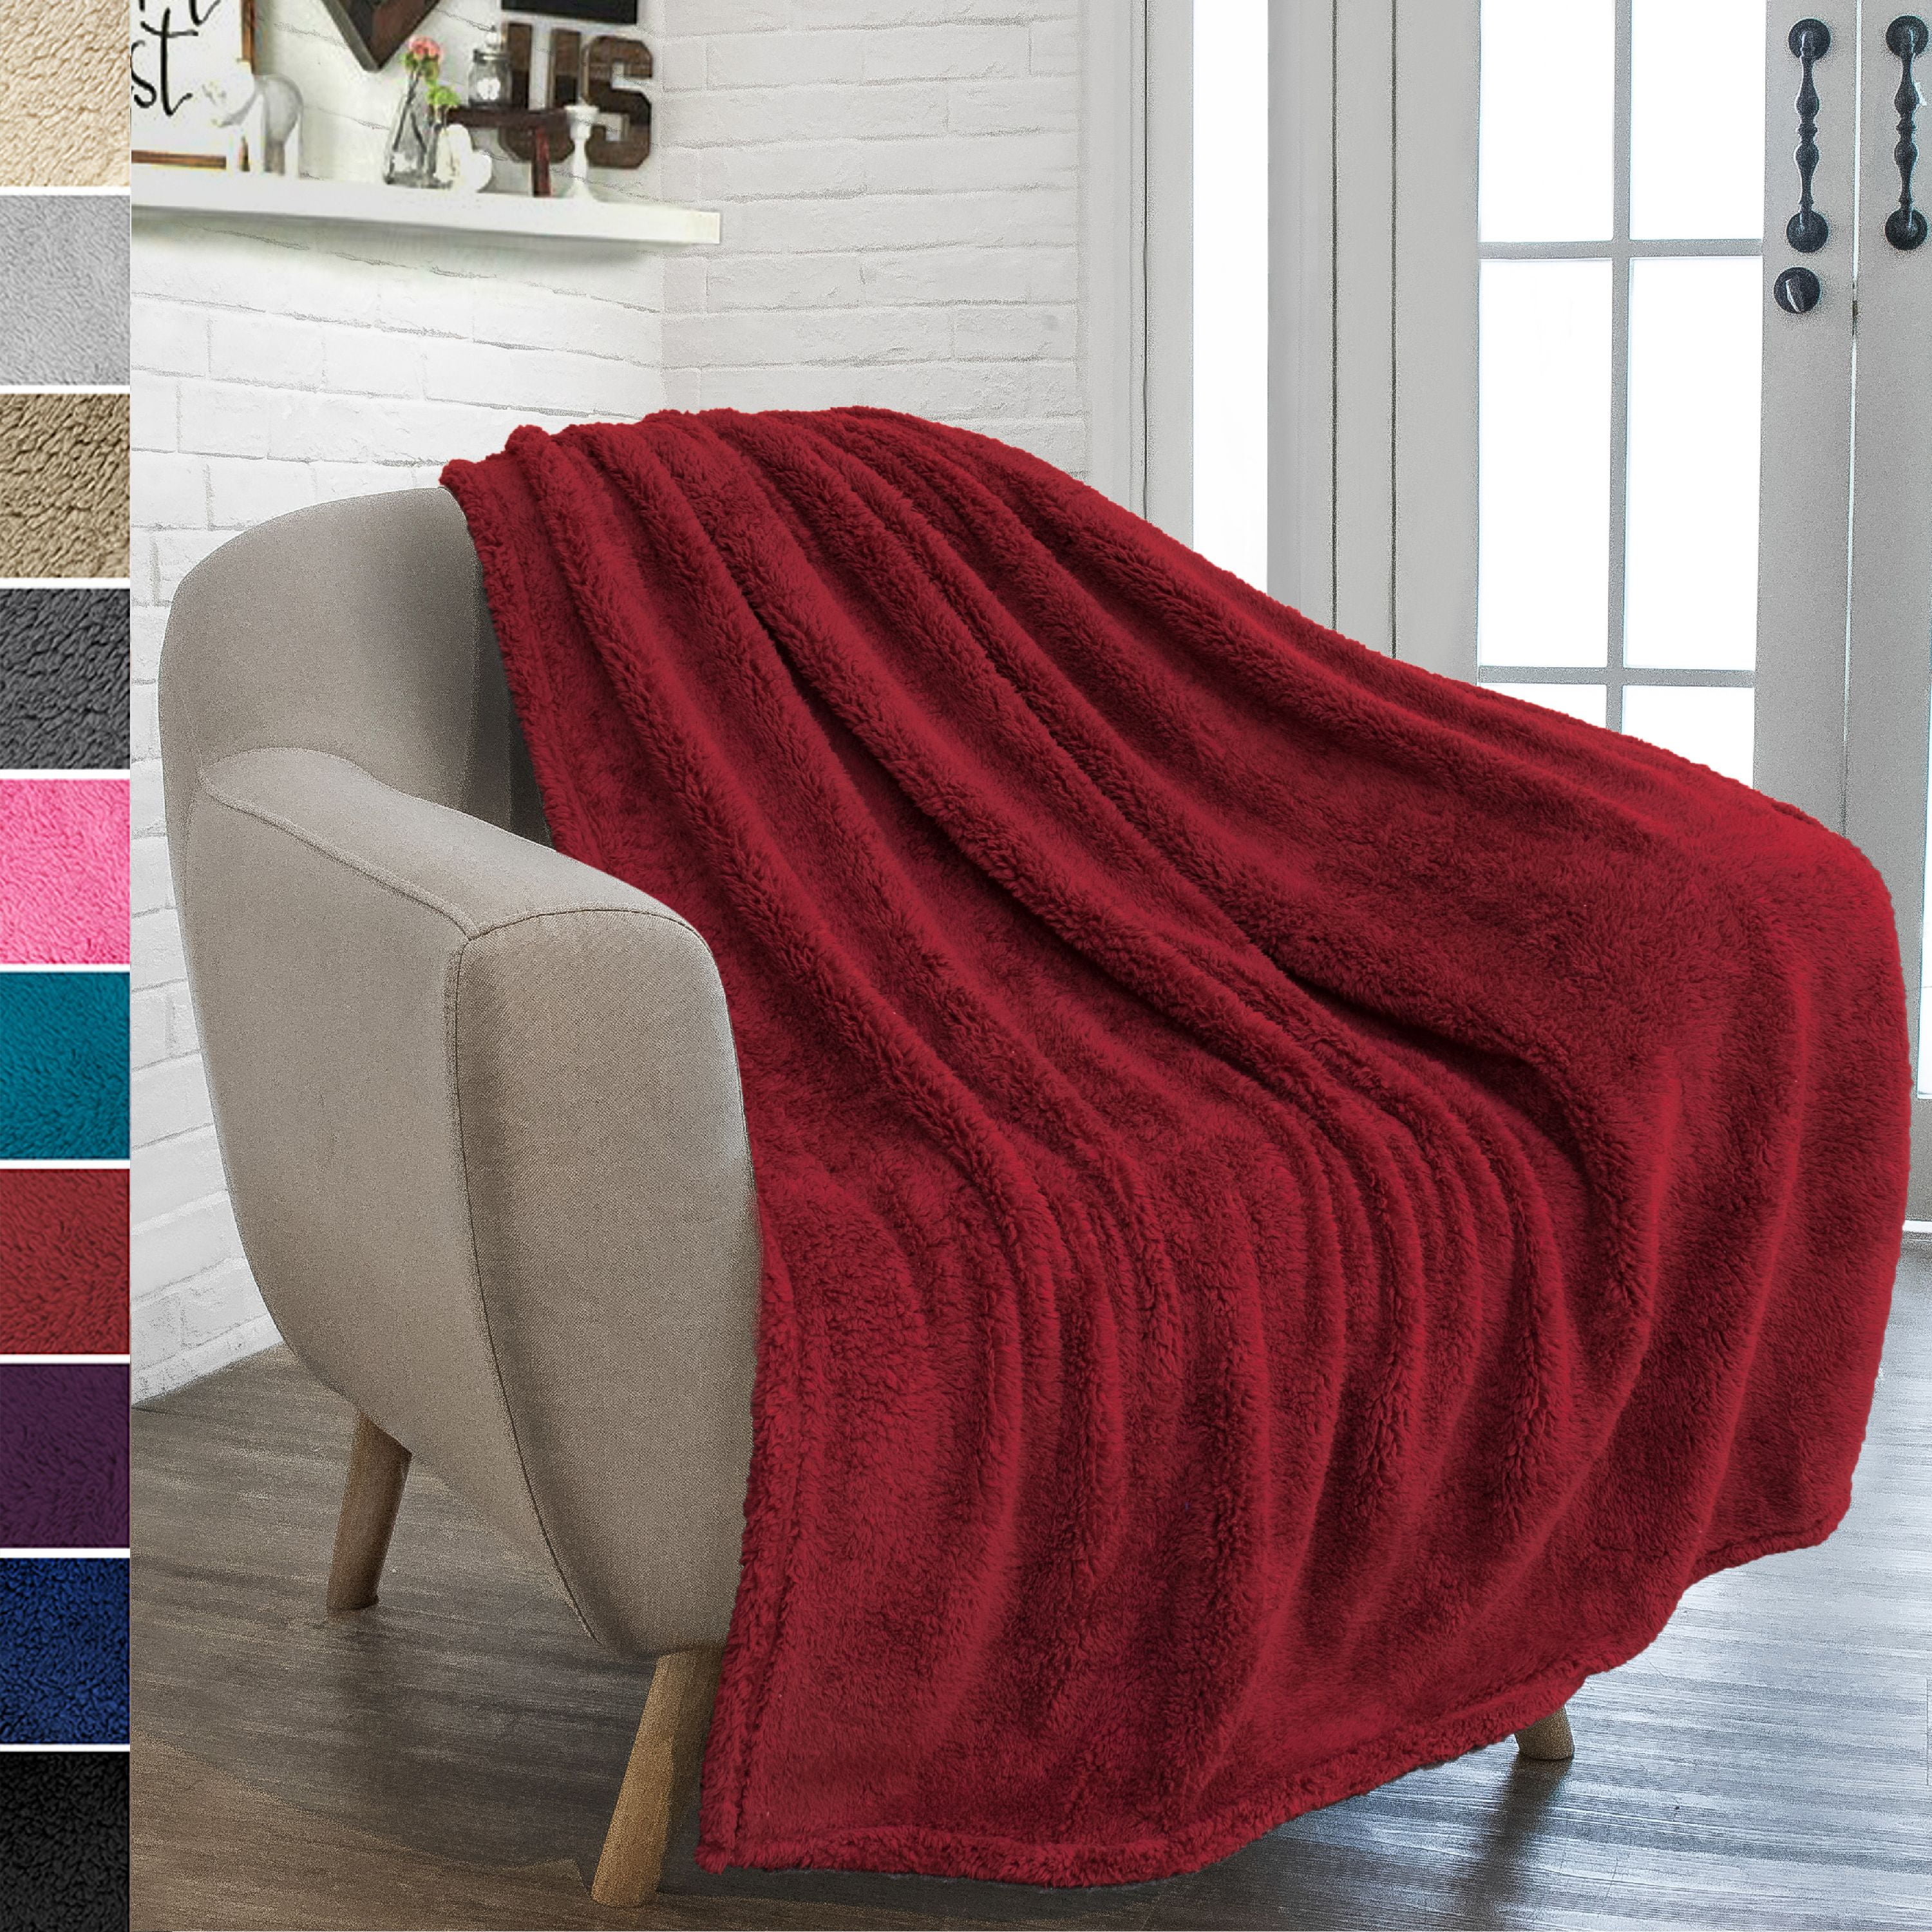 Badminton Fleece Throw Blanket Navy Thick Fuzzy Warm Soft Blankets and Throws for Sofa Warm Cozy Fluffy Fuzzy and Plush Sofa Big bedsure Bed 40x50 13 